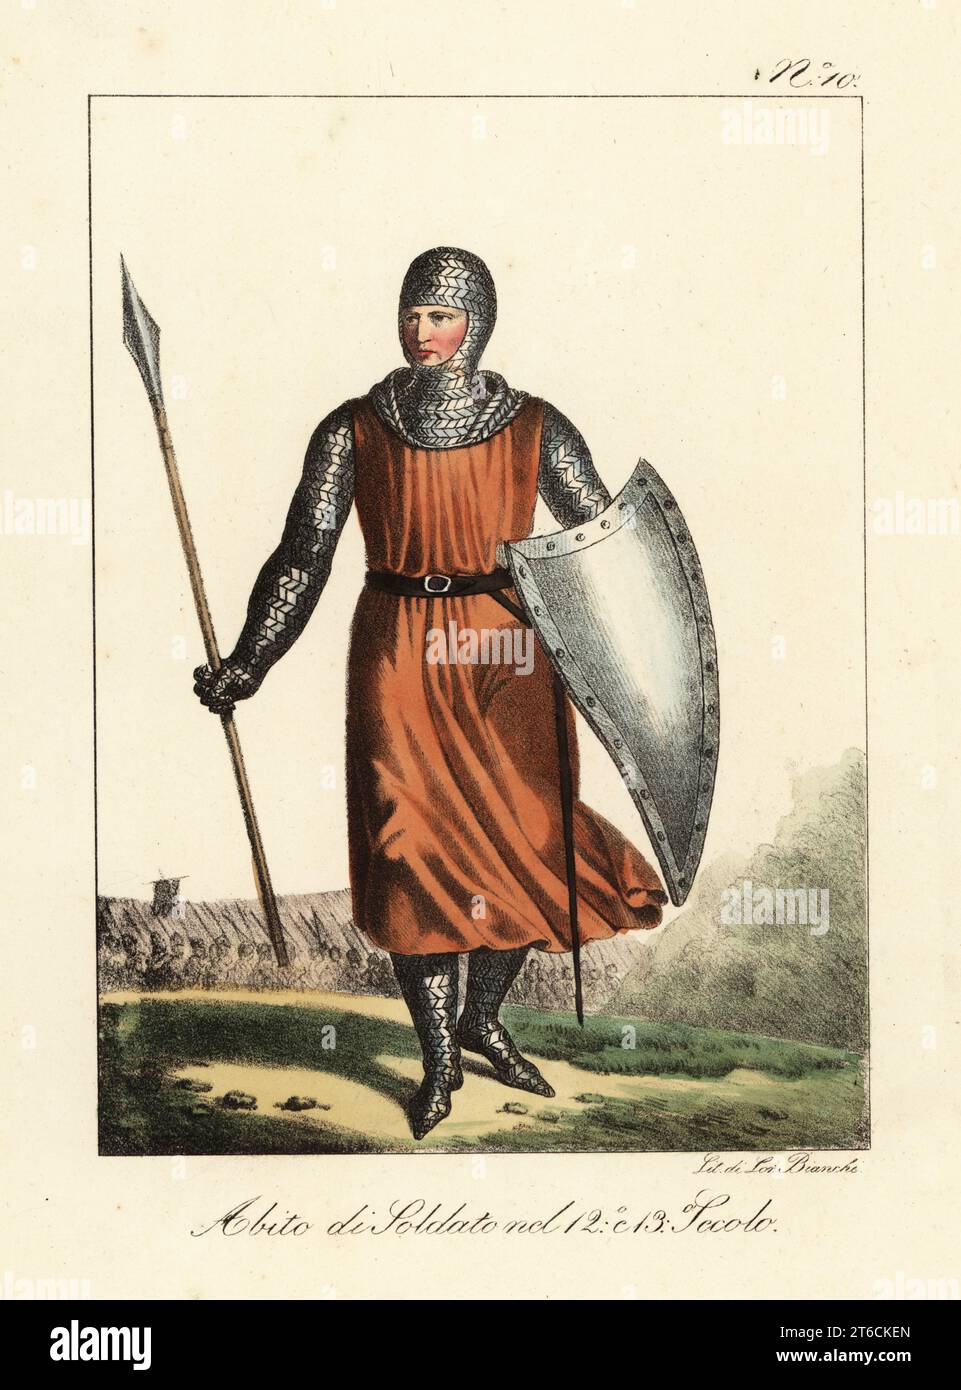 Costume of a French soldier, 12th and 13th century. In chainmail hauberk with hood, tunic, belt, armed with lance, sword and shield. Habit des soldats pendant les 12e et 13e Siecle. Handcoloured lithograph by Lorenzo Bianchi after Hippolyte Lecomte from Costumi civili e militari della monarchia francese dal 1200 al 1820, Naples, 1825. Italian edition of Lecomtes Civilian and military costumes of the French monarchy from 1200 to 1820. Stock Photo